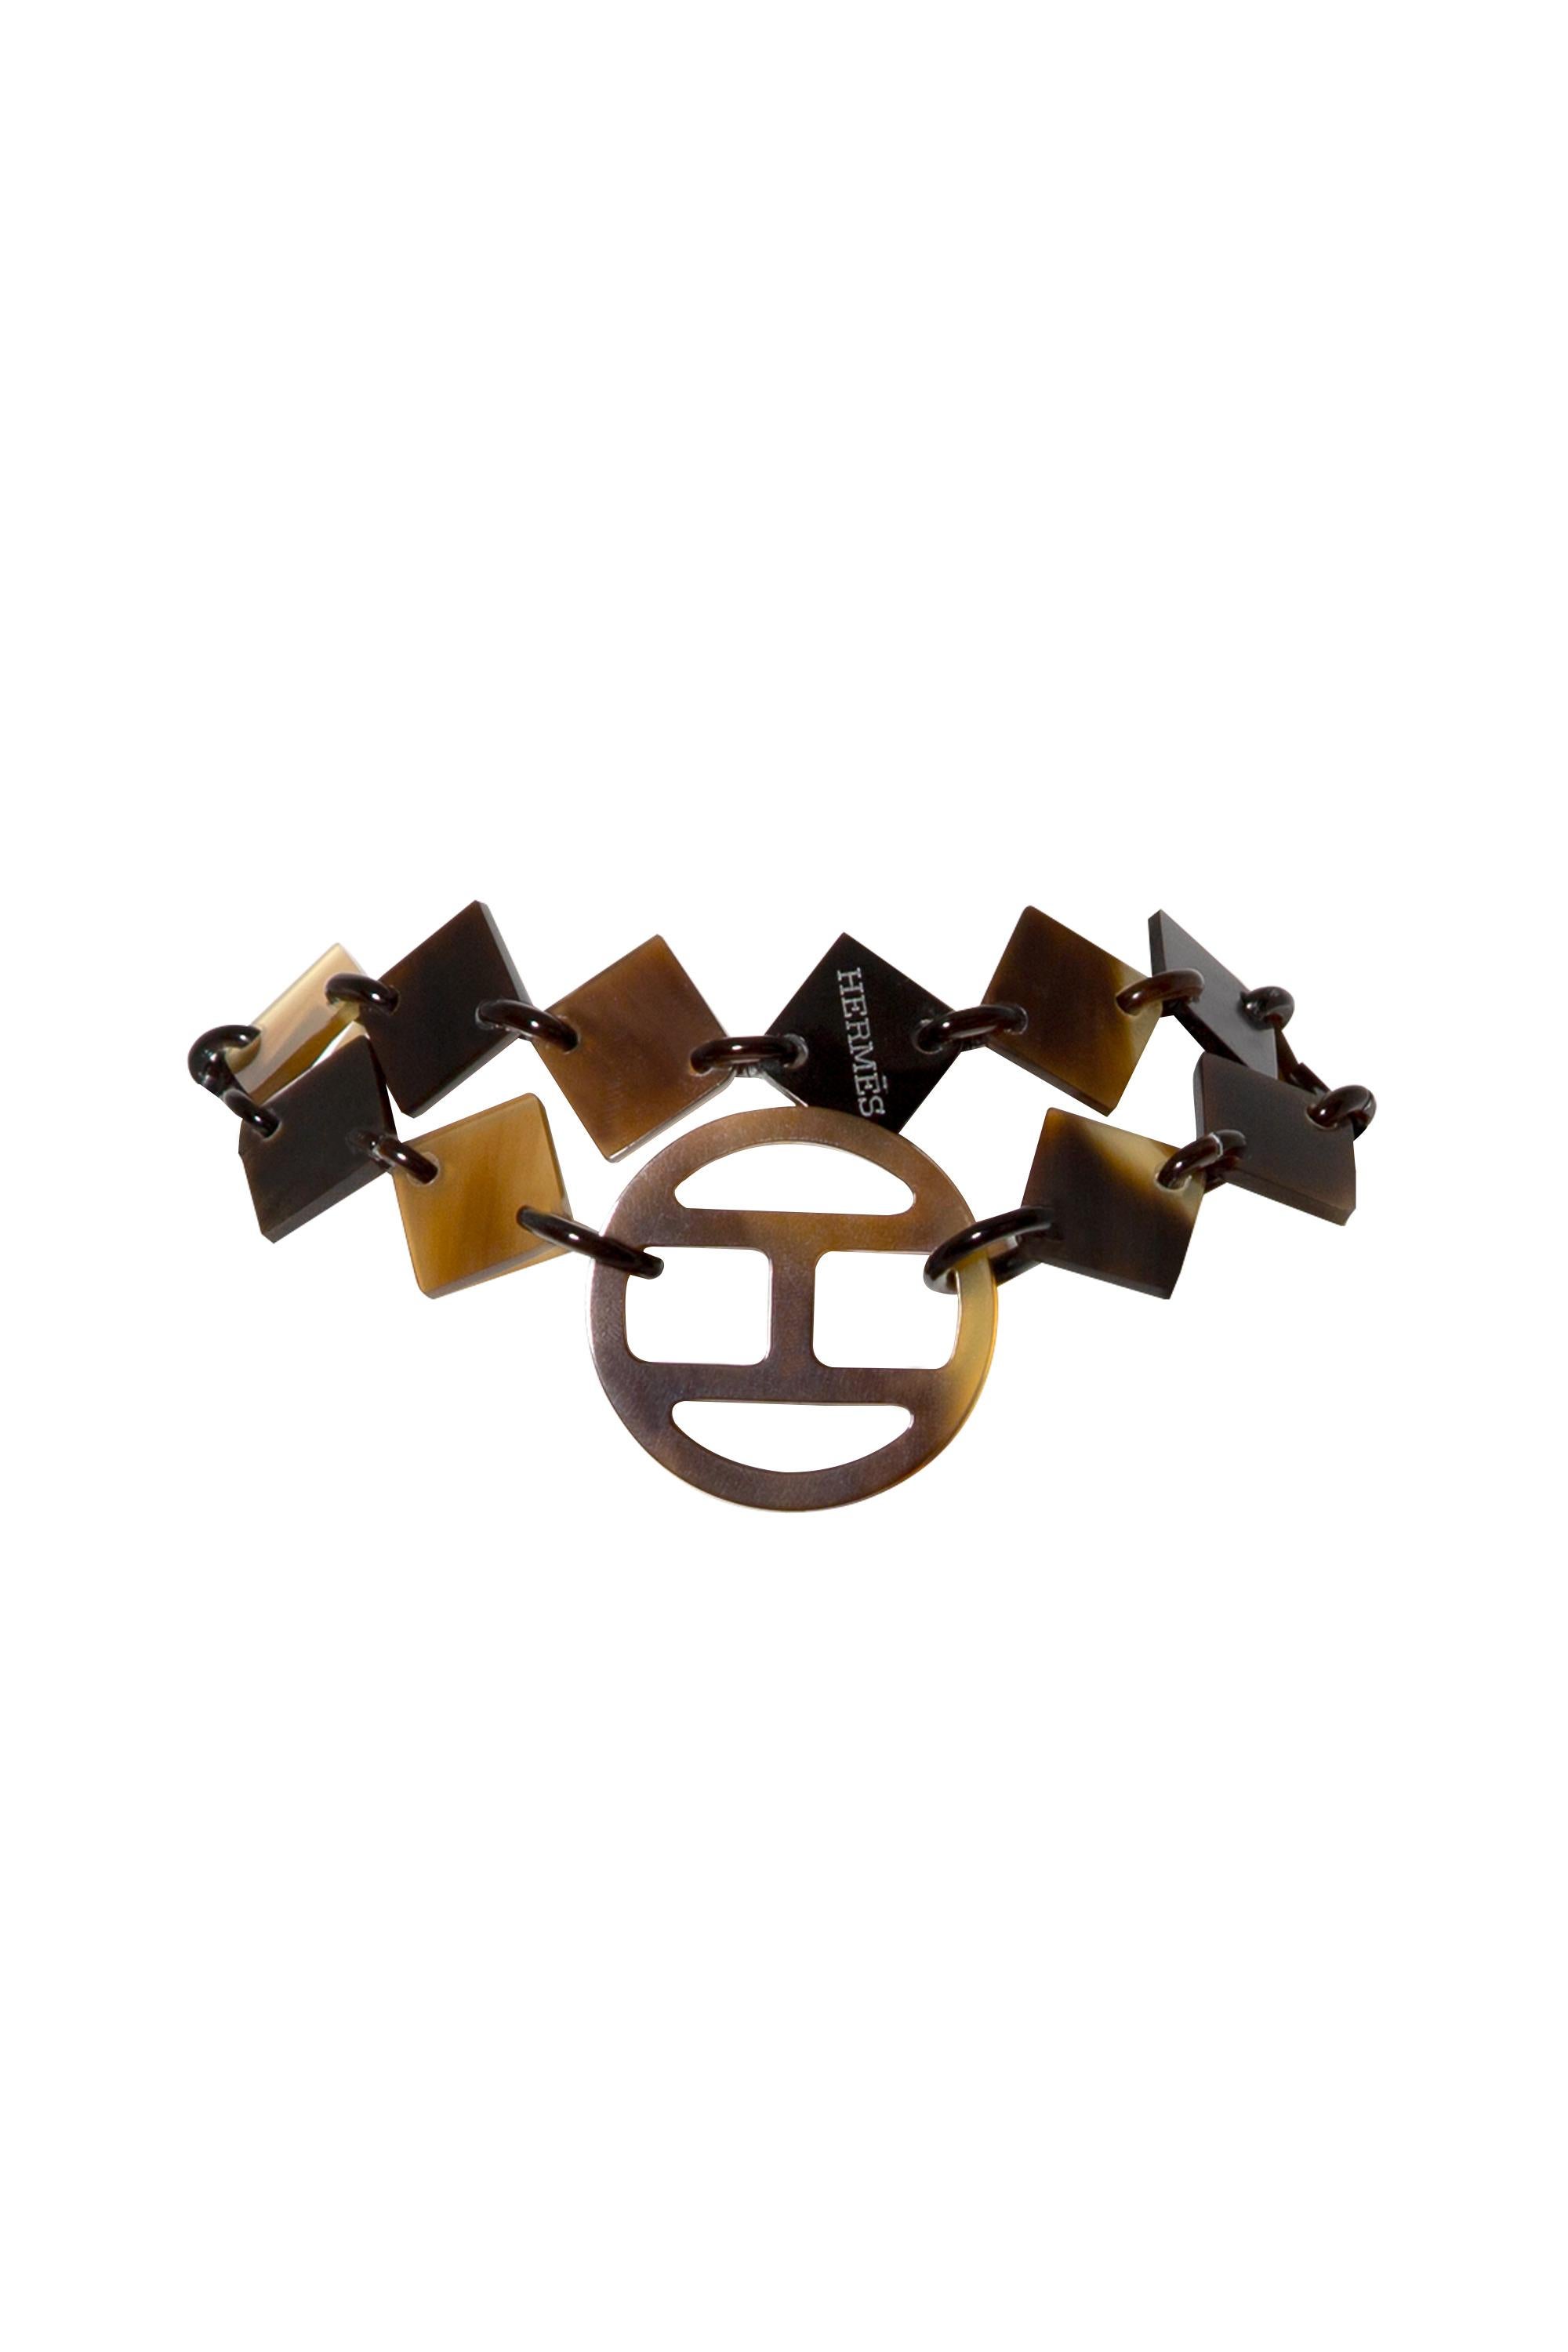 Discover the stunning craftsmanship of the Lena Necklace from Hermès.

•Made from luxurious buffalo horn, creating a beautifully unique and natural look
•Rich brown 
•Comes with a dustbag and box
•Excellent condition